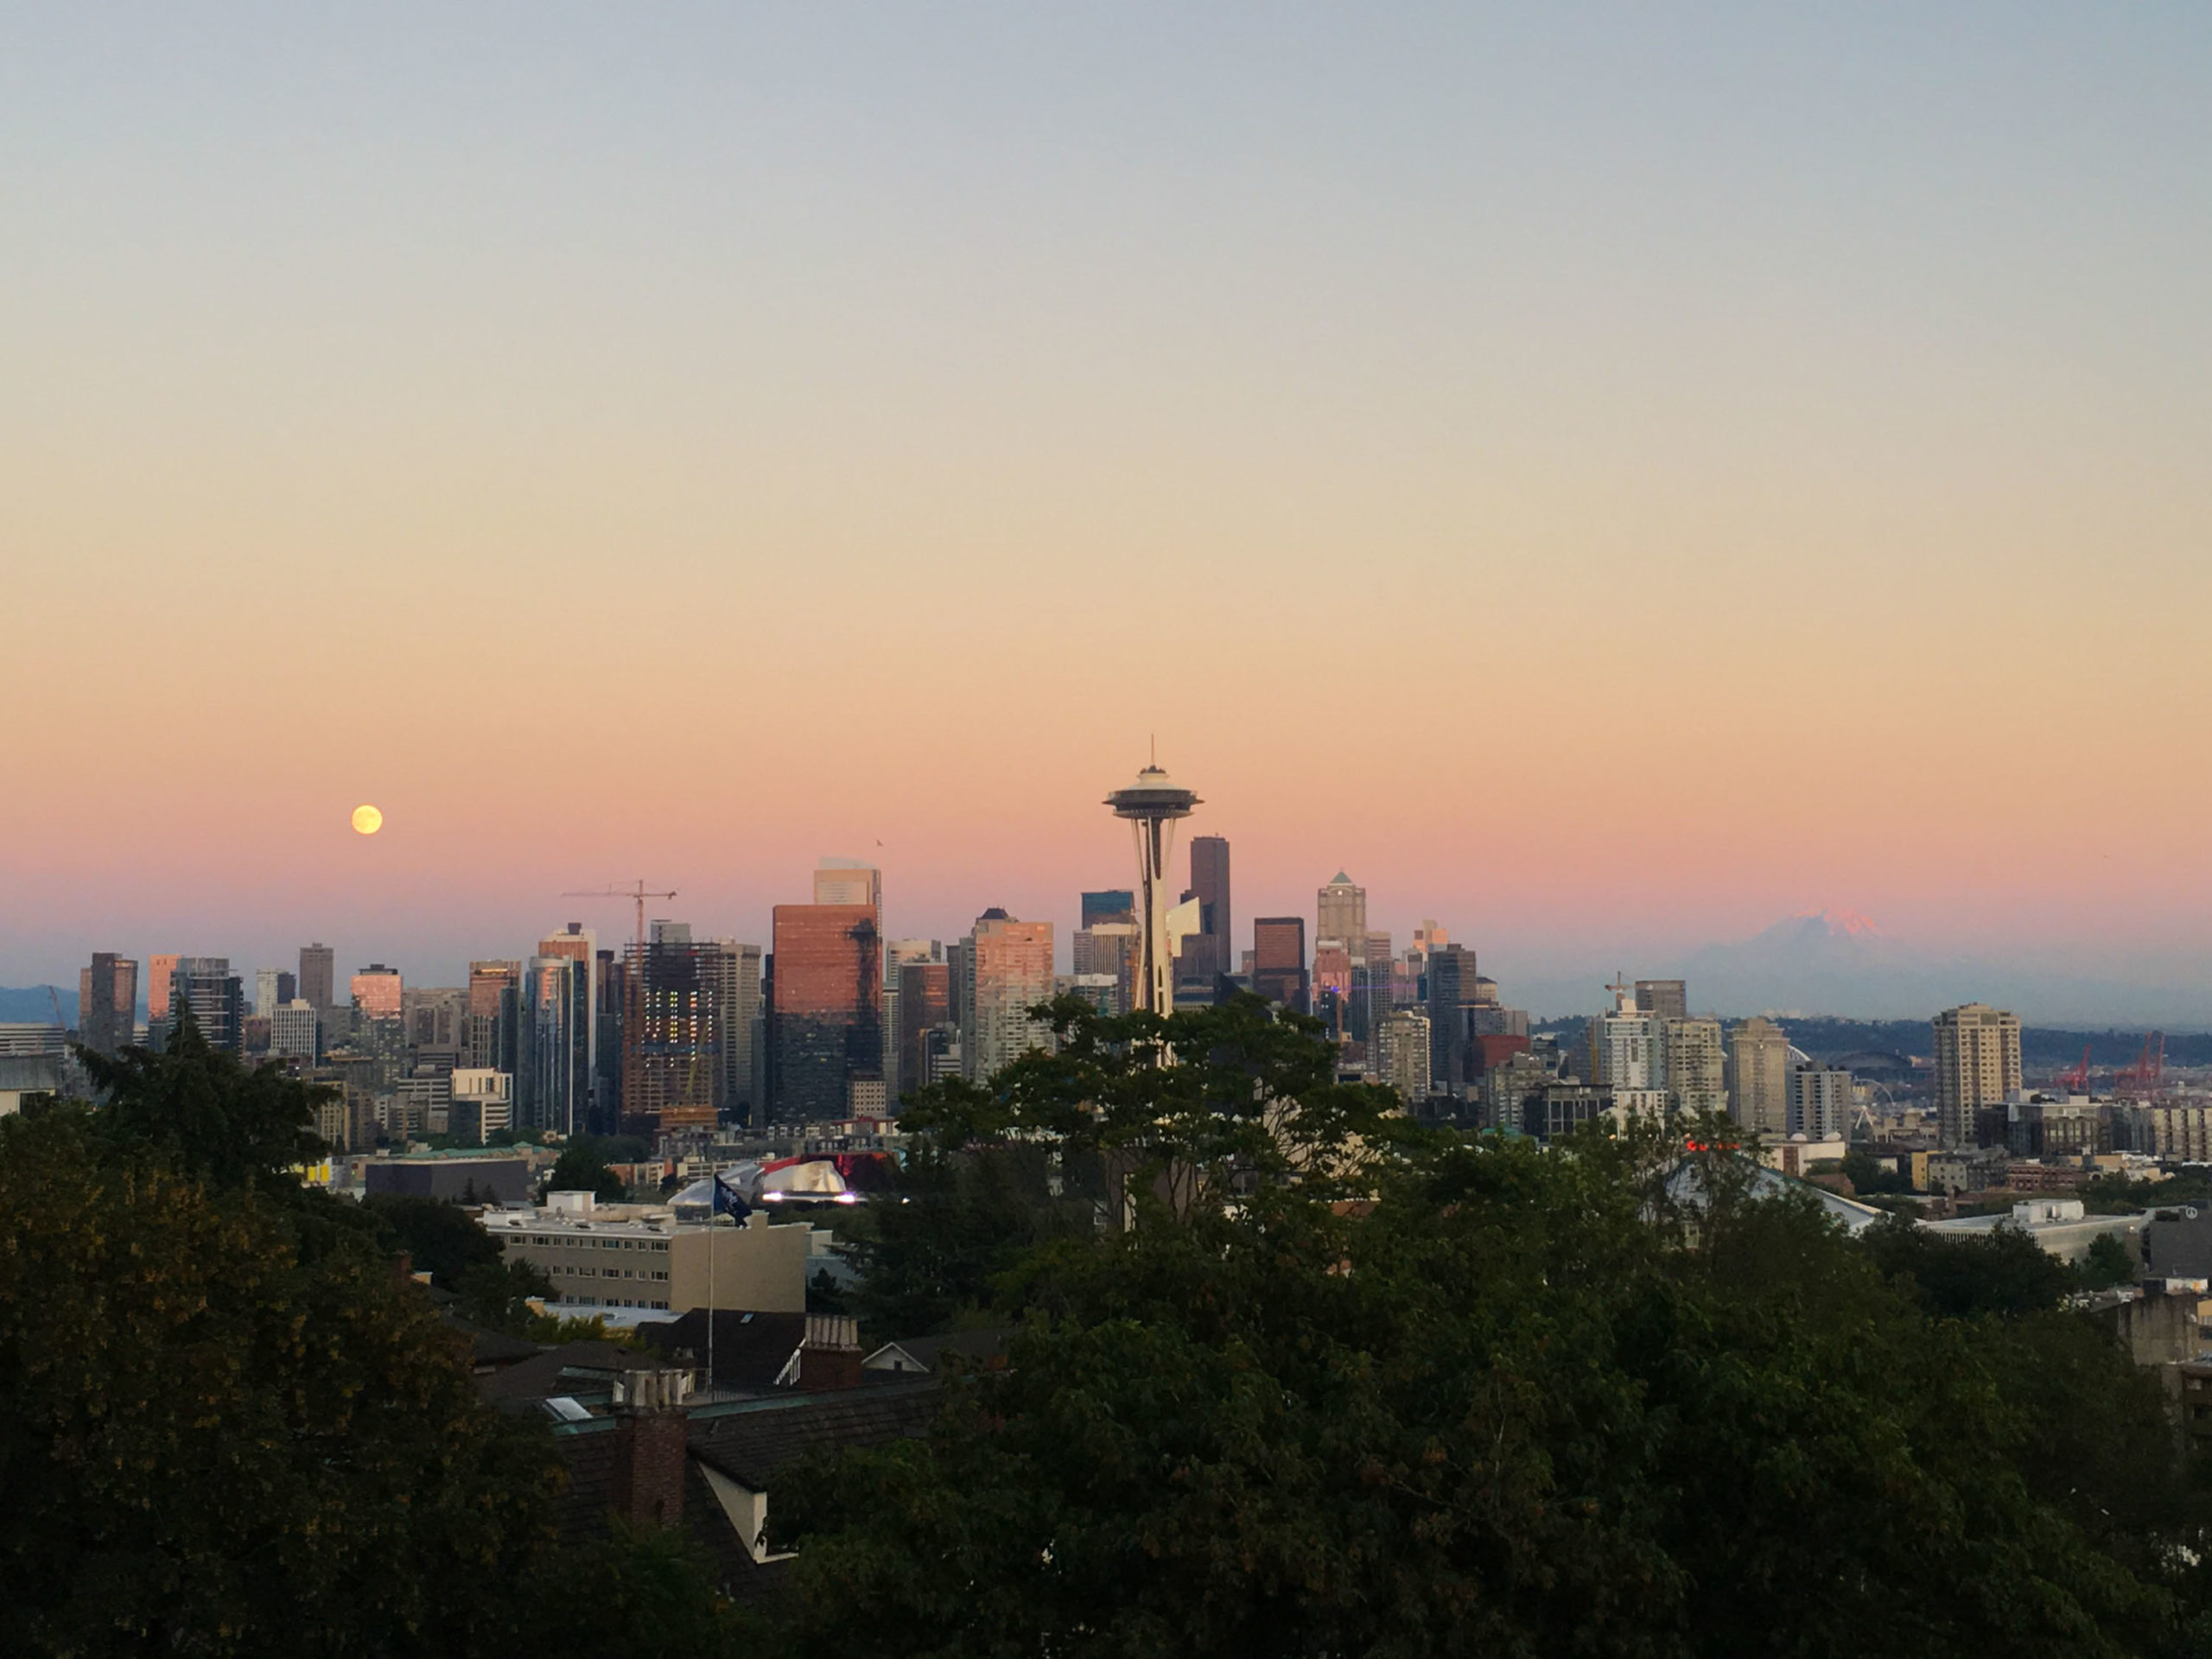 Introduction: Sleepless in Seattle